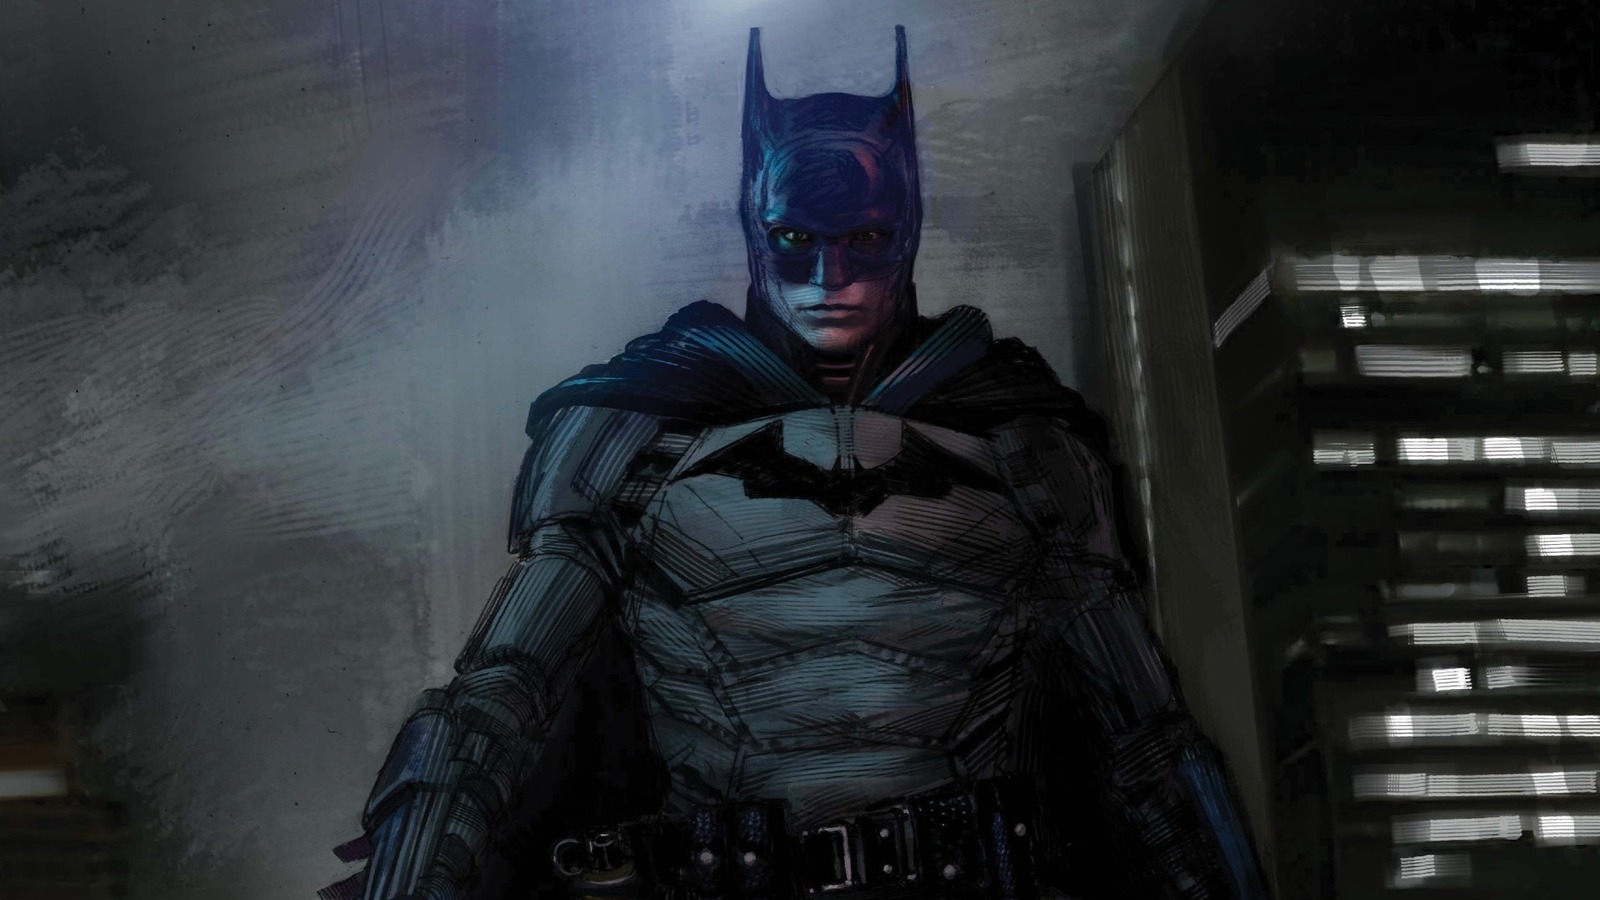 Gotham Knights Release Date Finally Announced - IGN